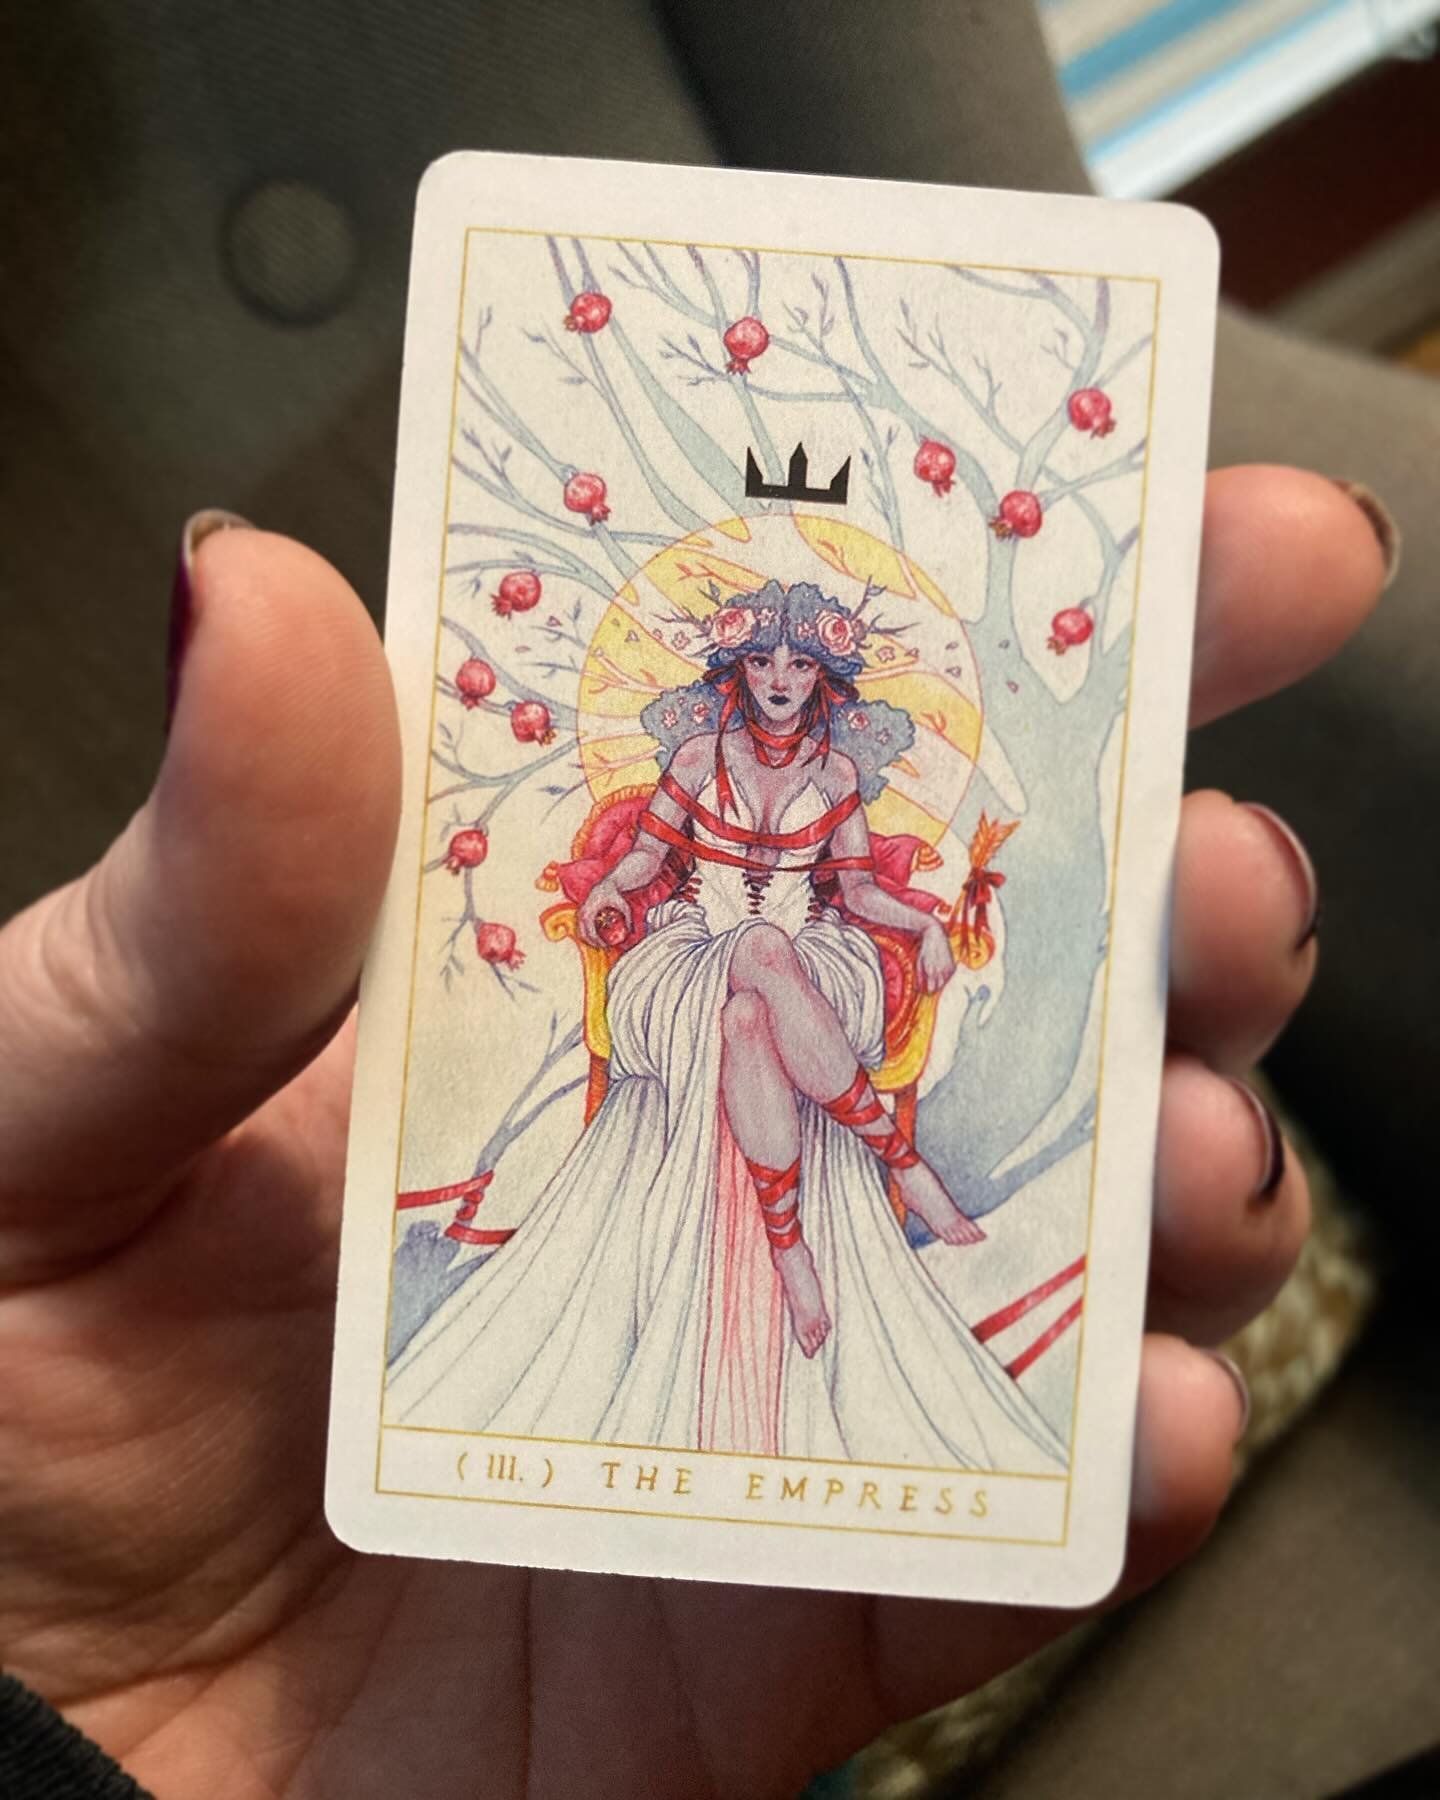 🌔 | The Empress for the #LemniscusTarot represents Infernal Queen Persephone now basking in the light after her arduous journey through both trauma and shadow, confronting her own toxicity and reflecting on her worthiness and agency.

As an artist b